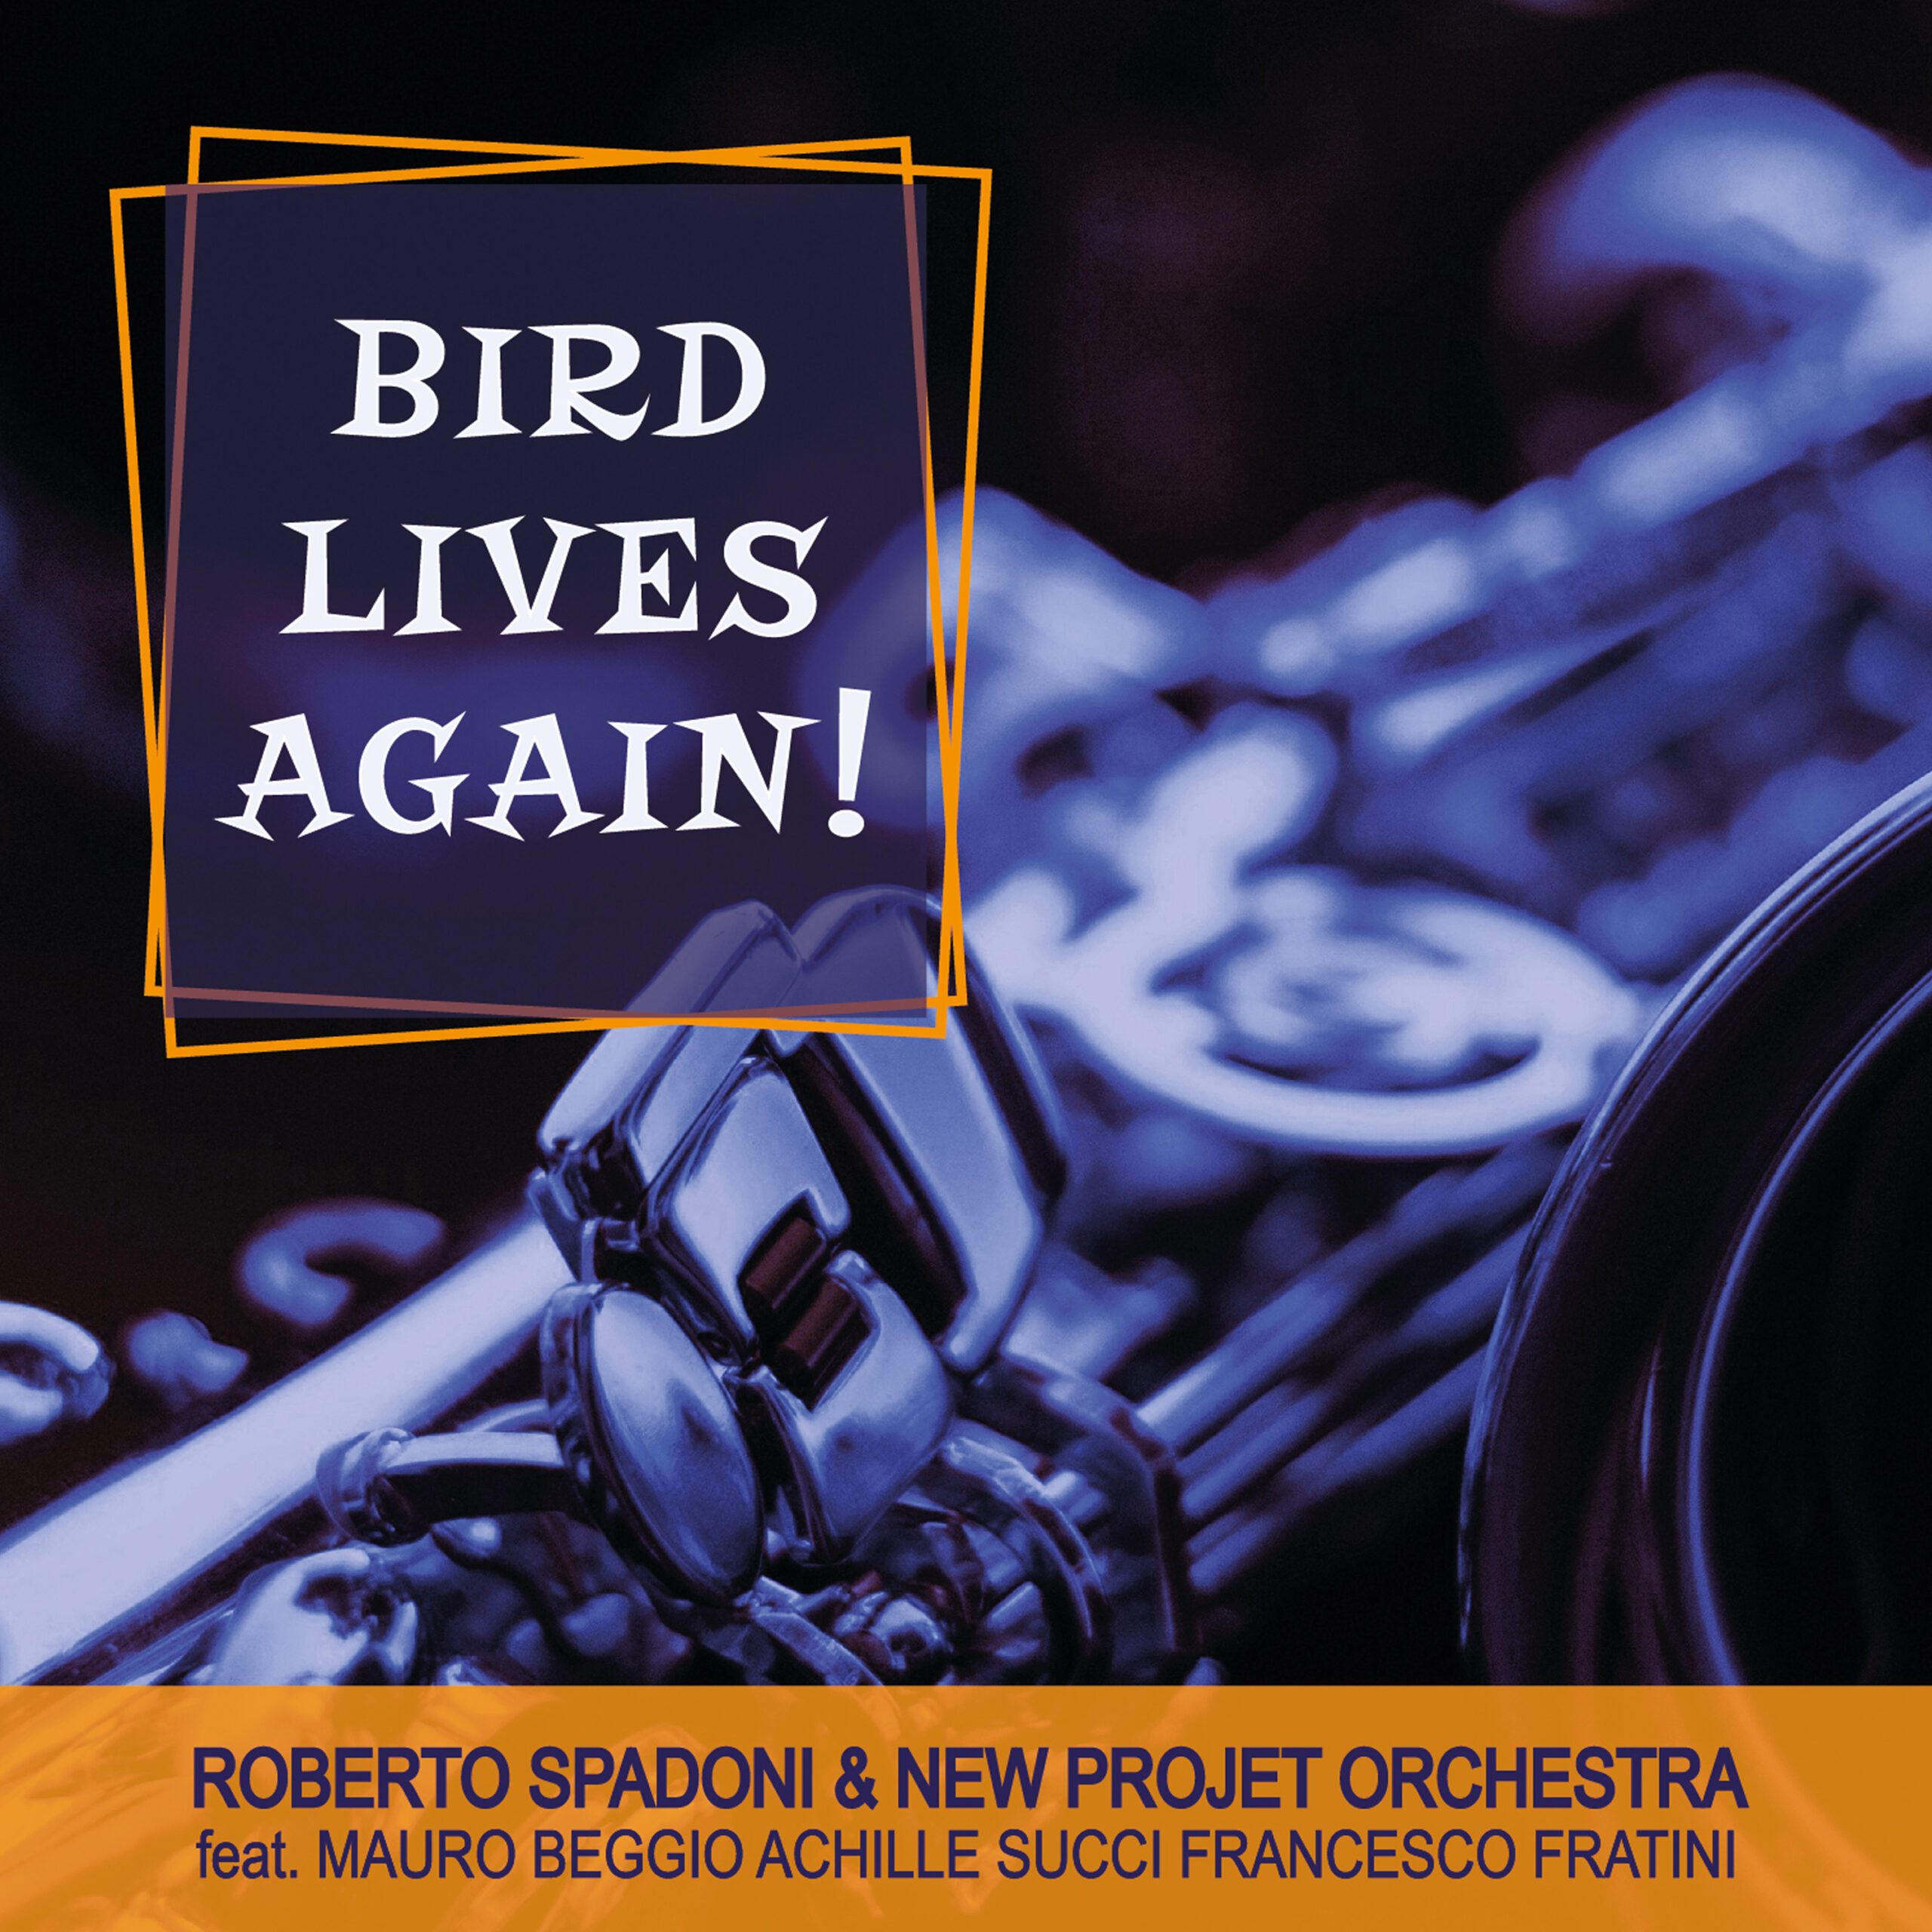 BIRD LIVES AGAIN! by New Project Orchestra & Roberto Spadoni